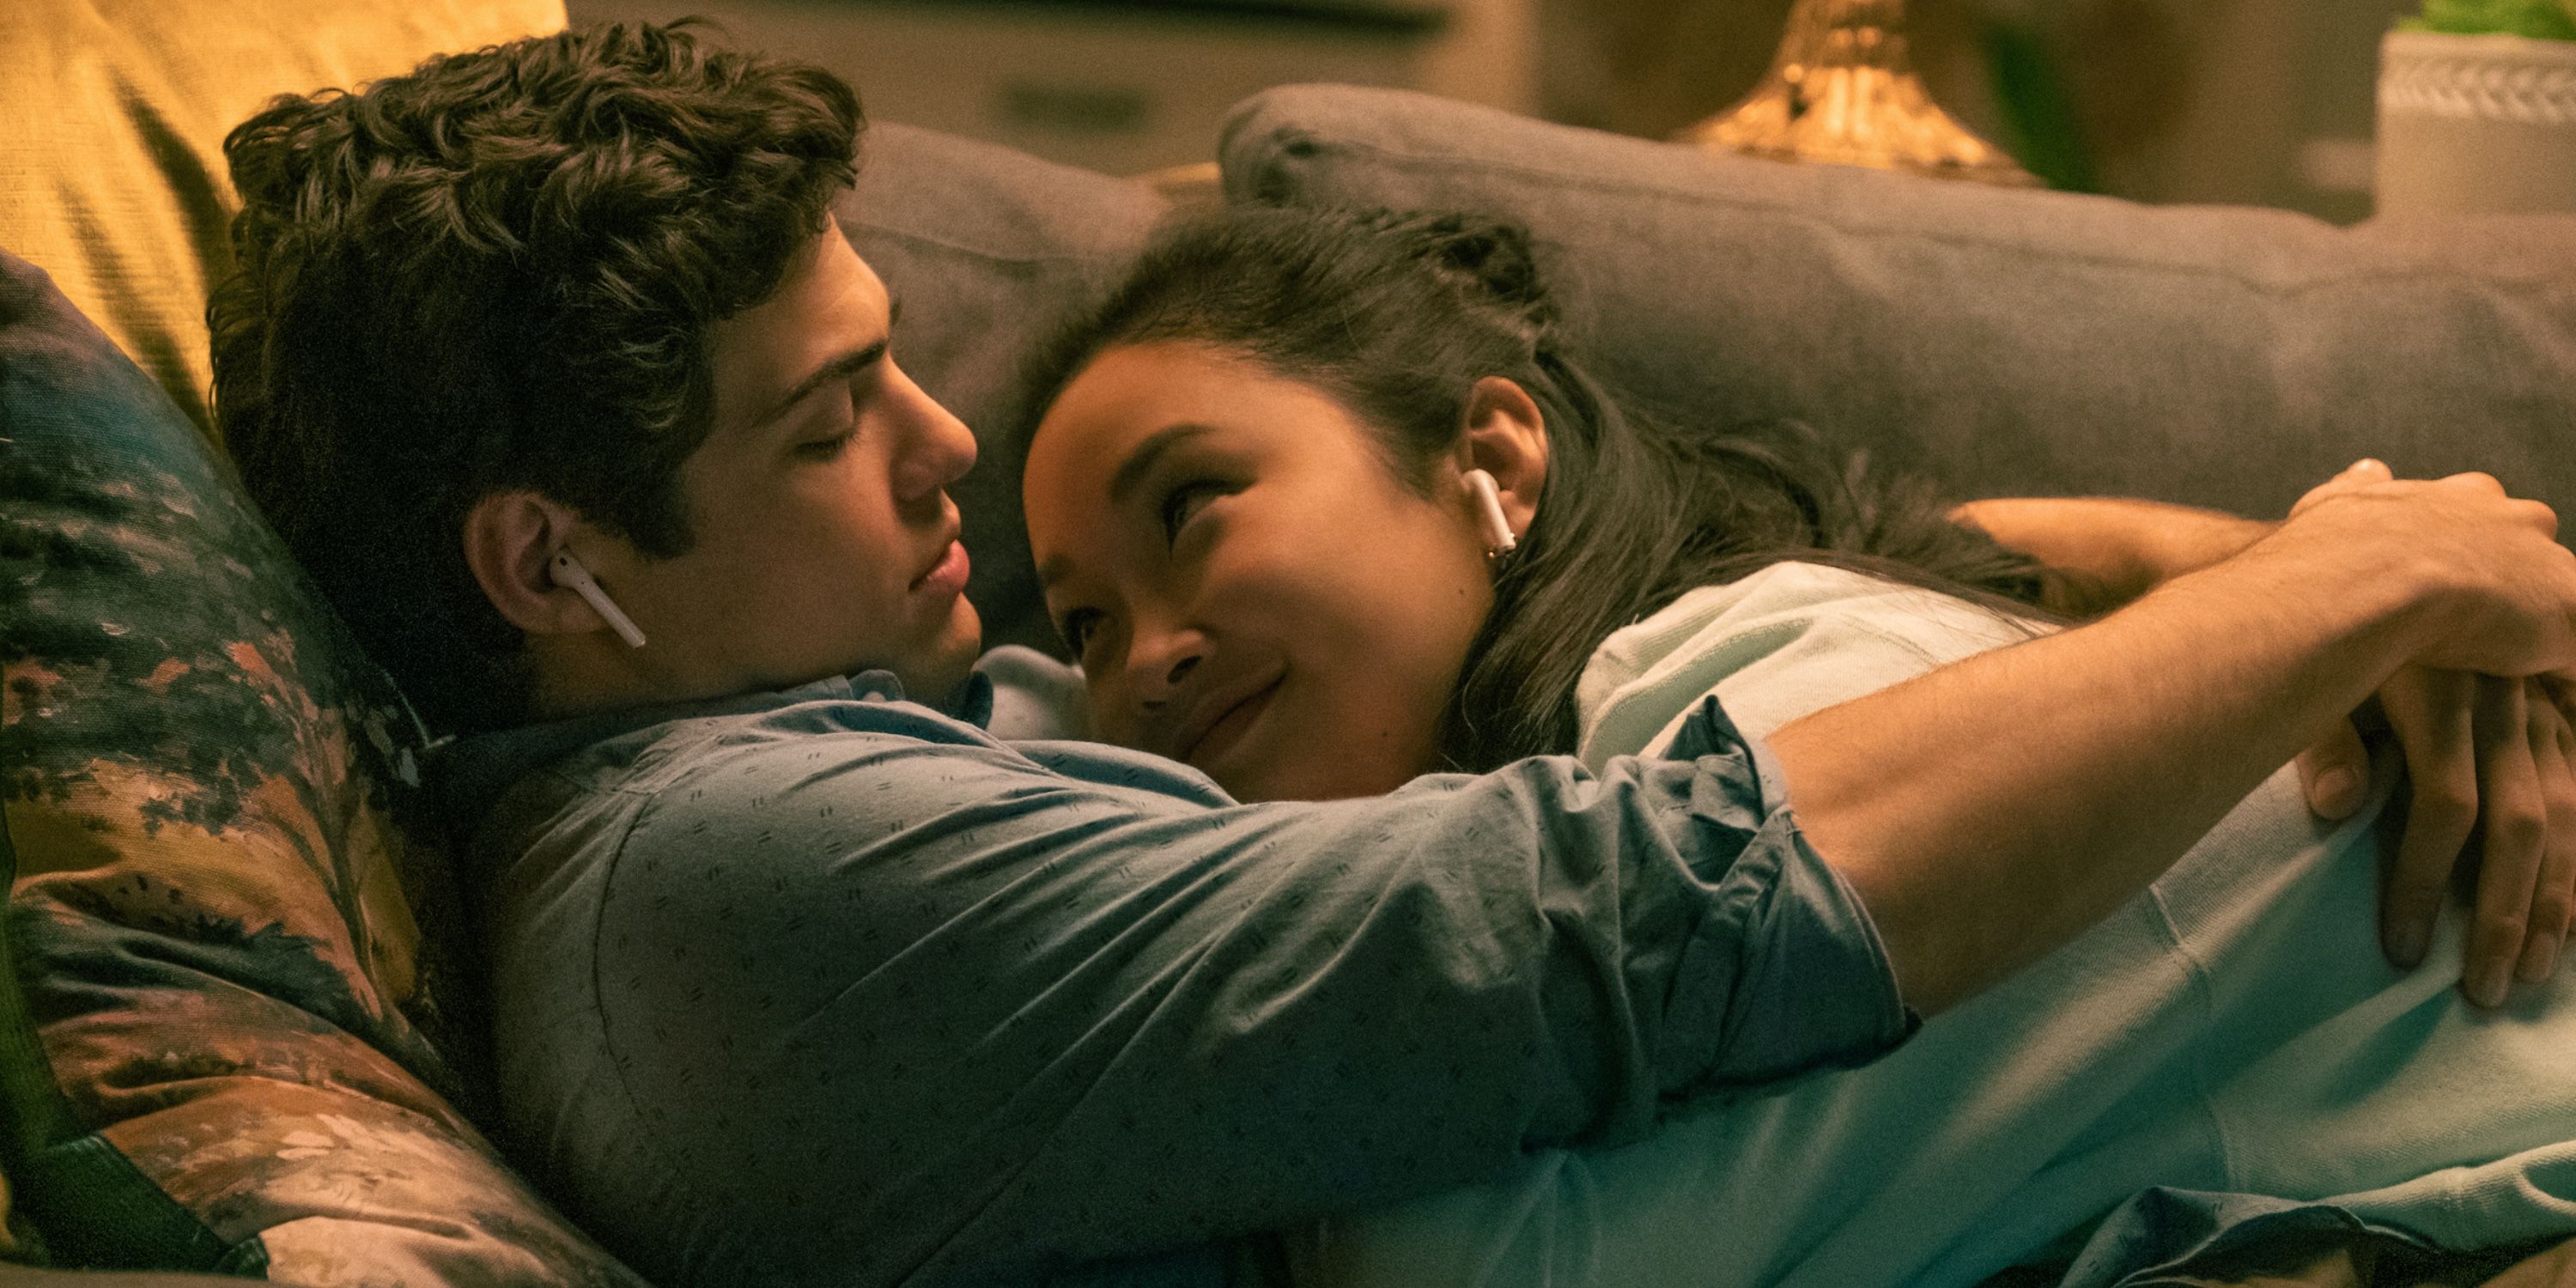 Noah Centineo and Lana Condor in To All the Boys: Always and Forever on Netflix